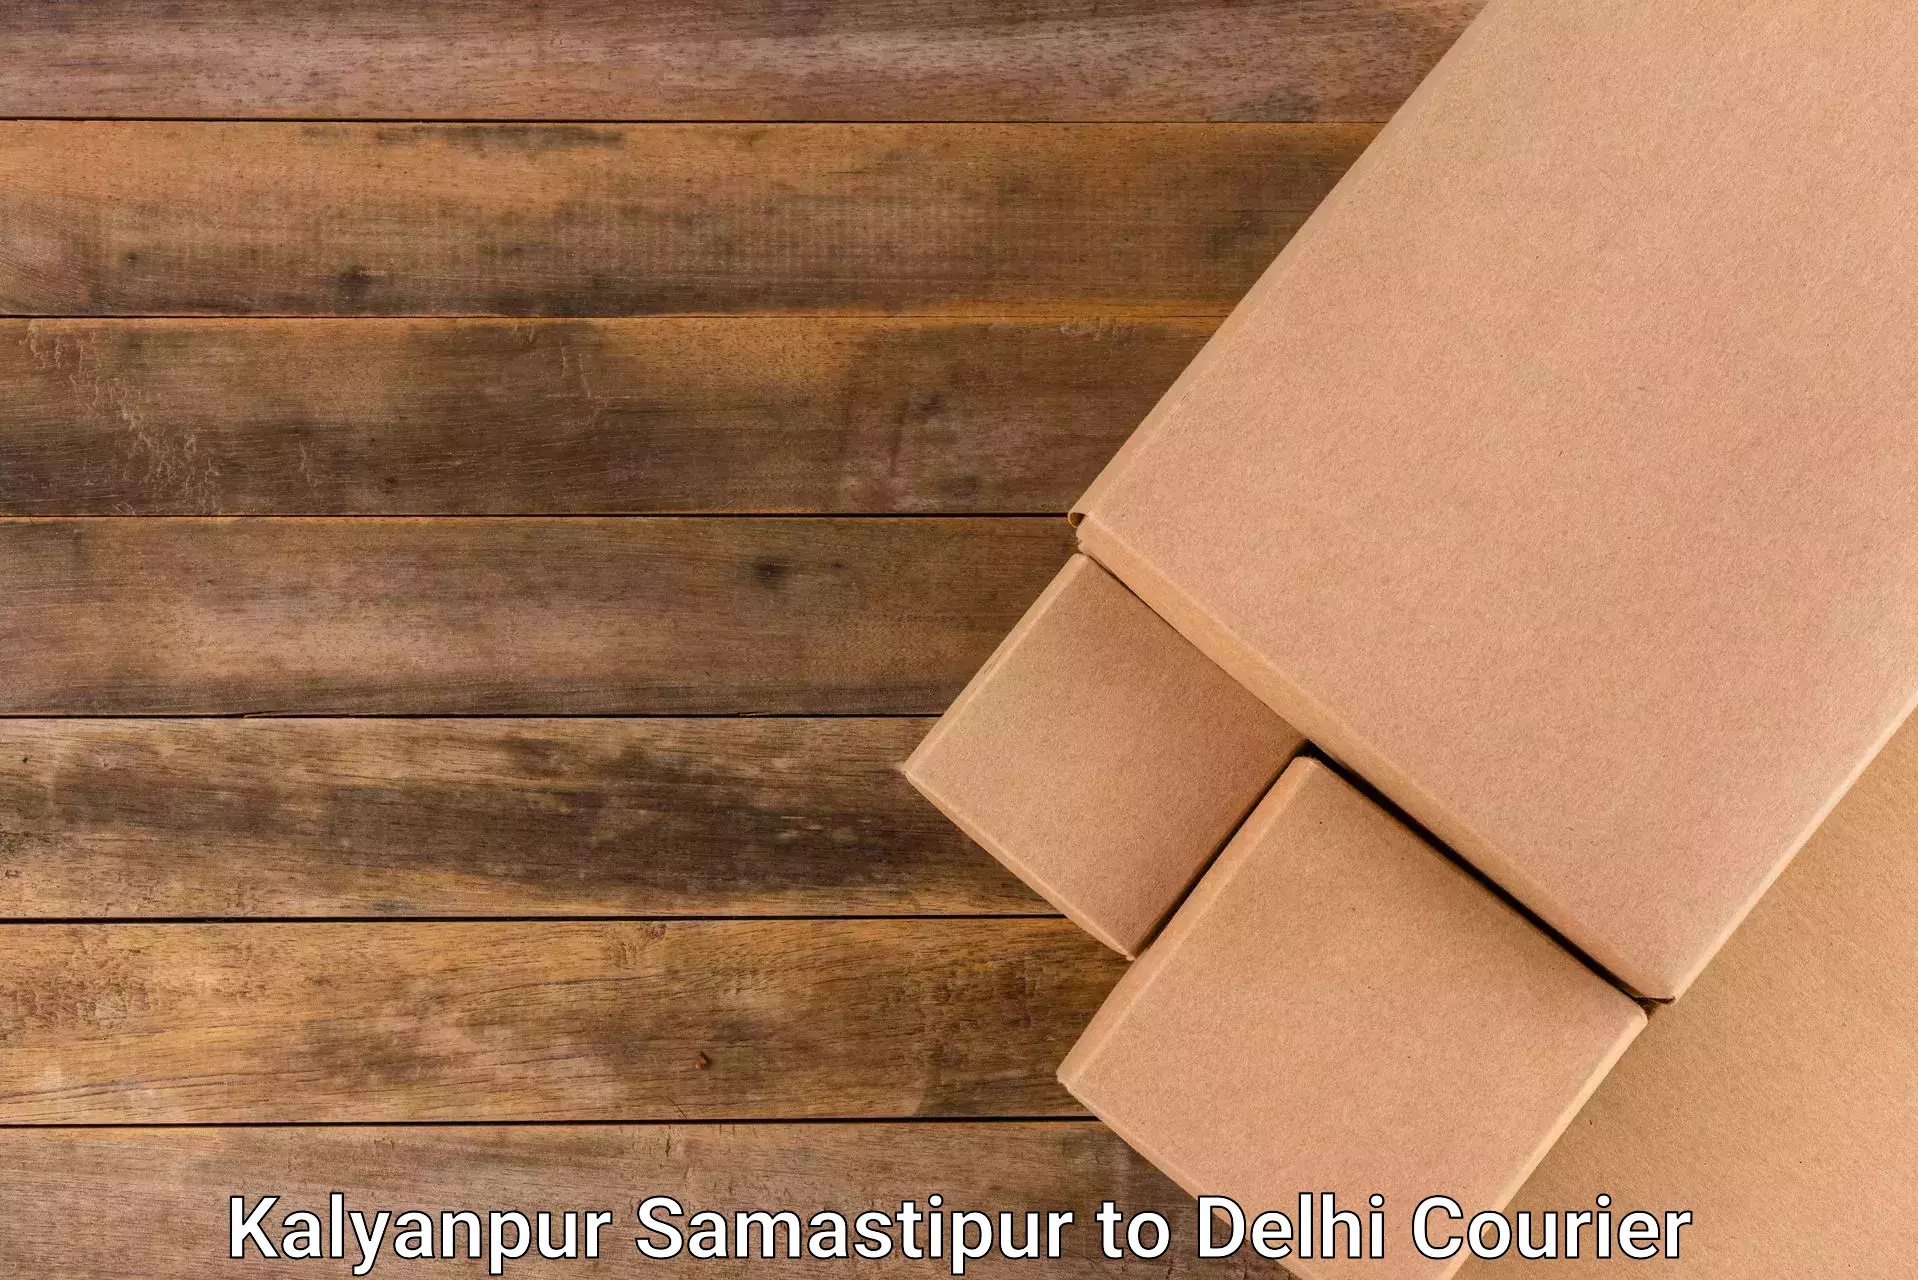 Express delivery solutions in Kalyanpur Samastipur to Delhi